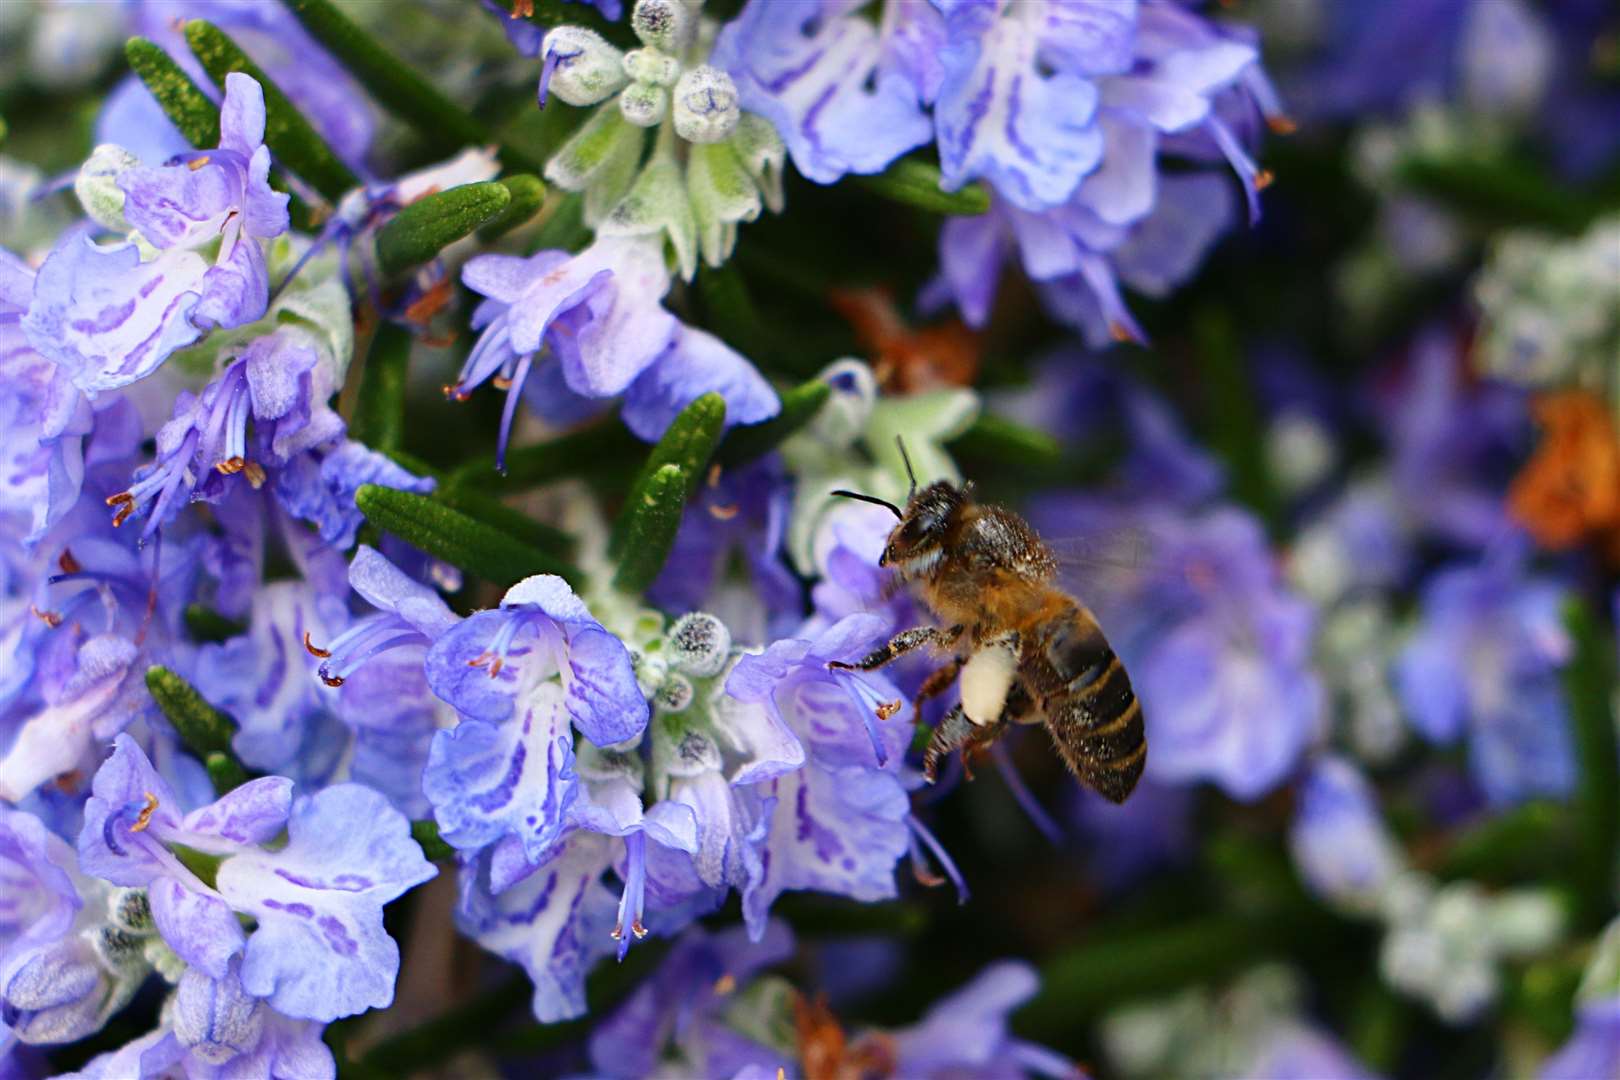 Plant a variety of flowers to attract bees.